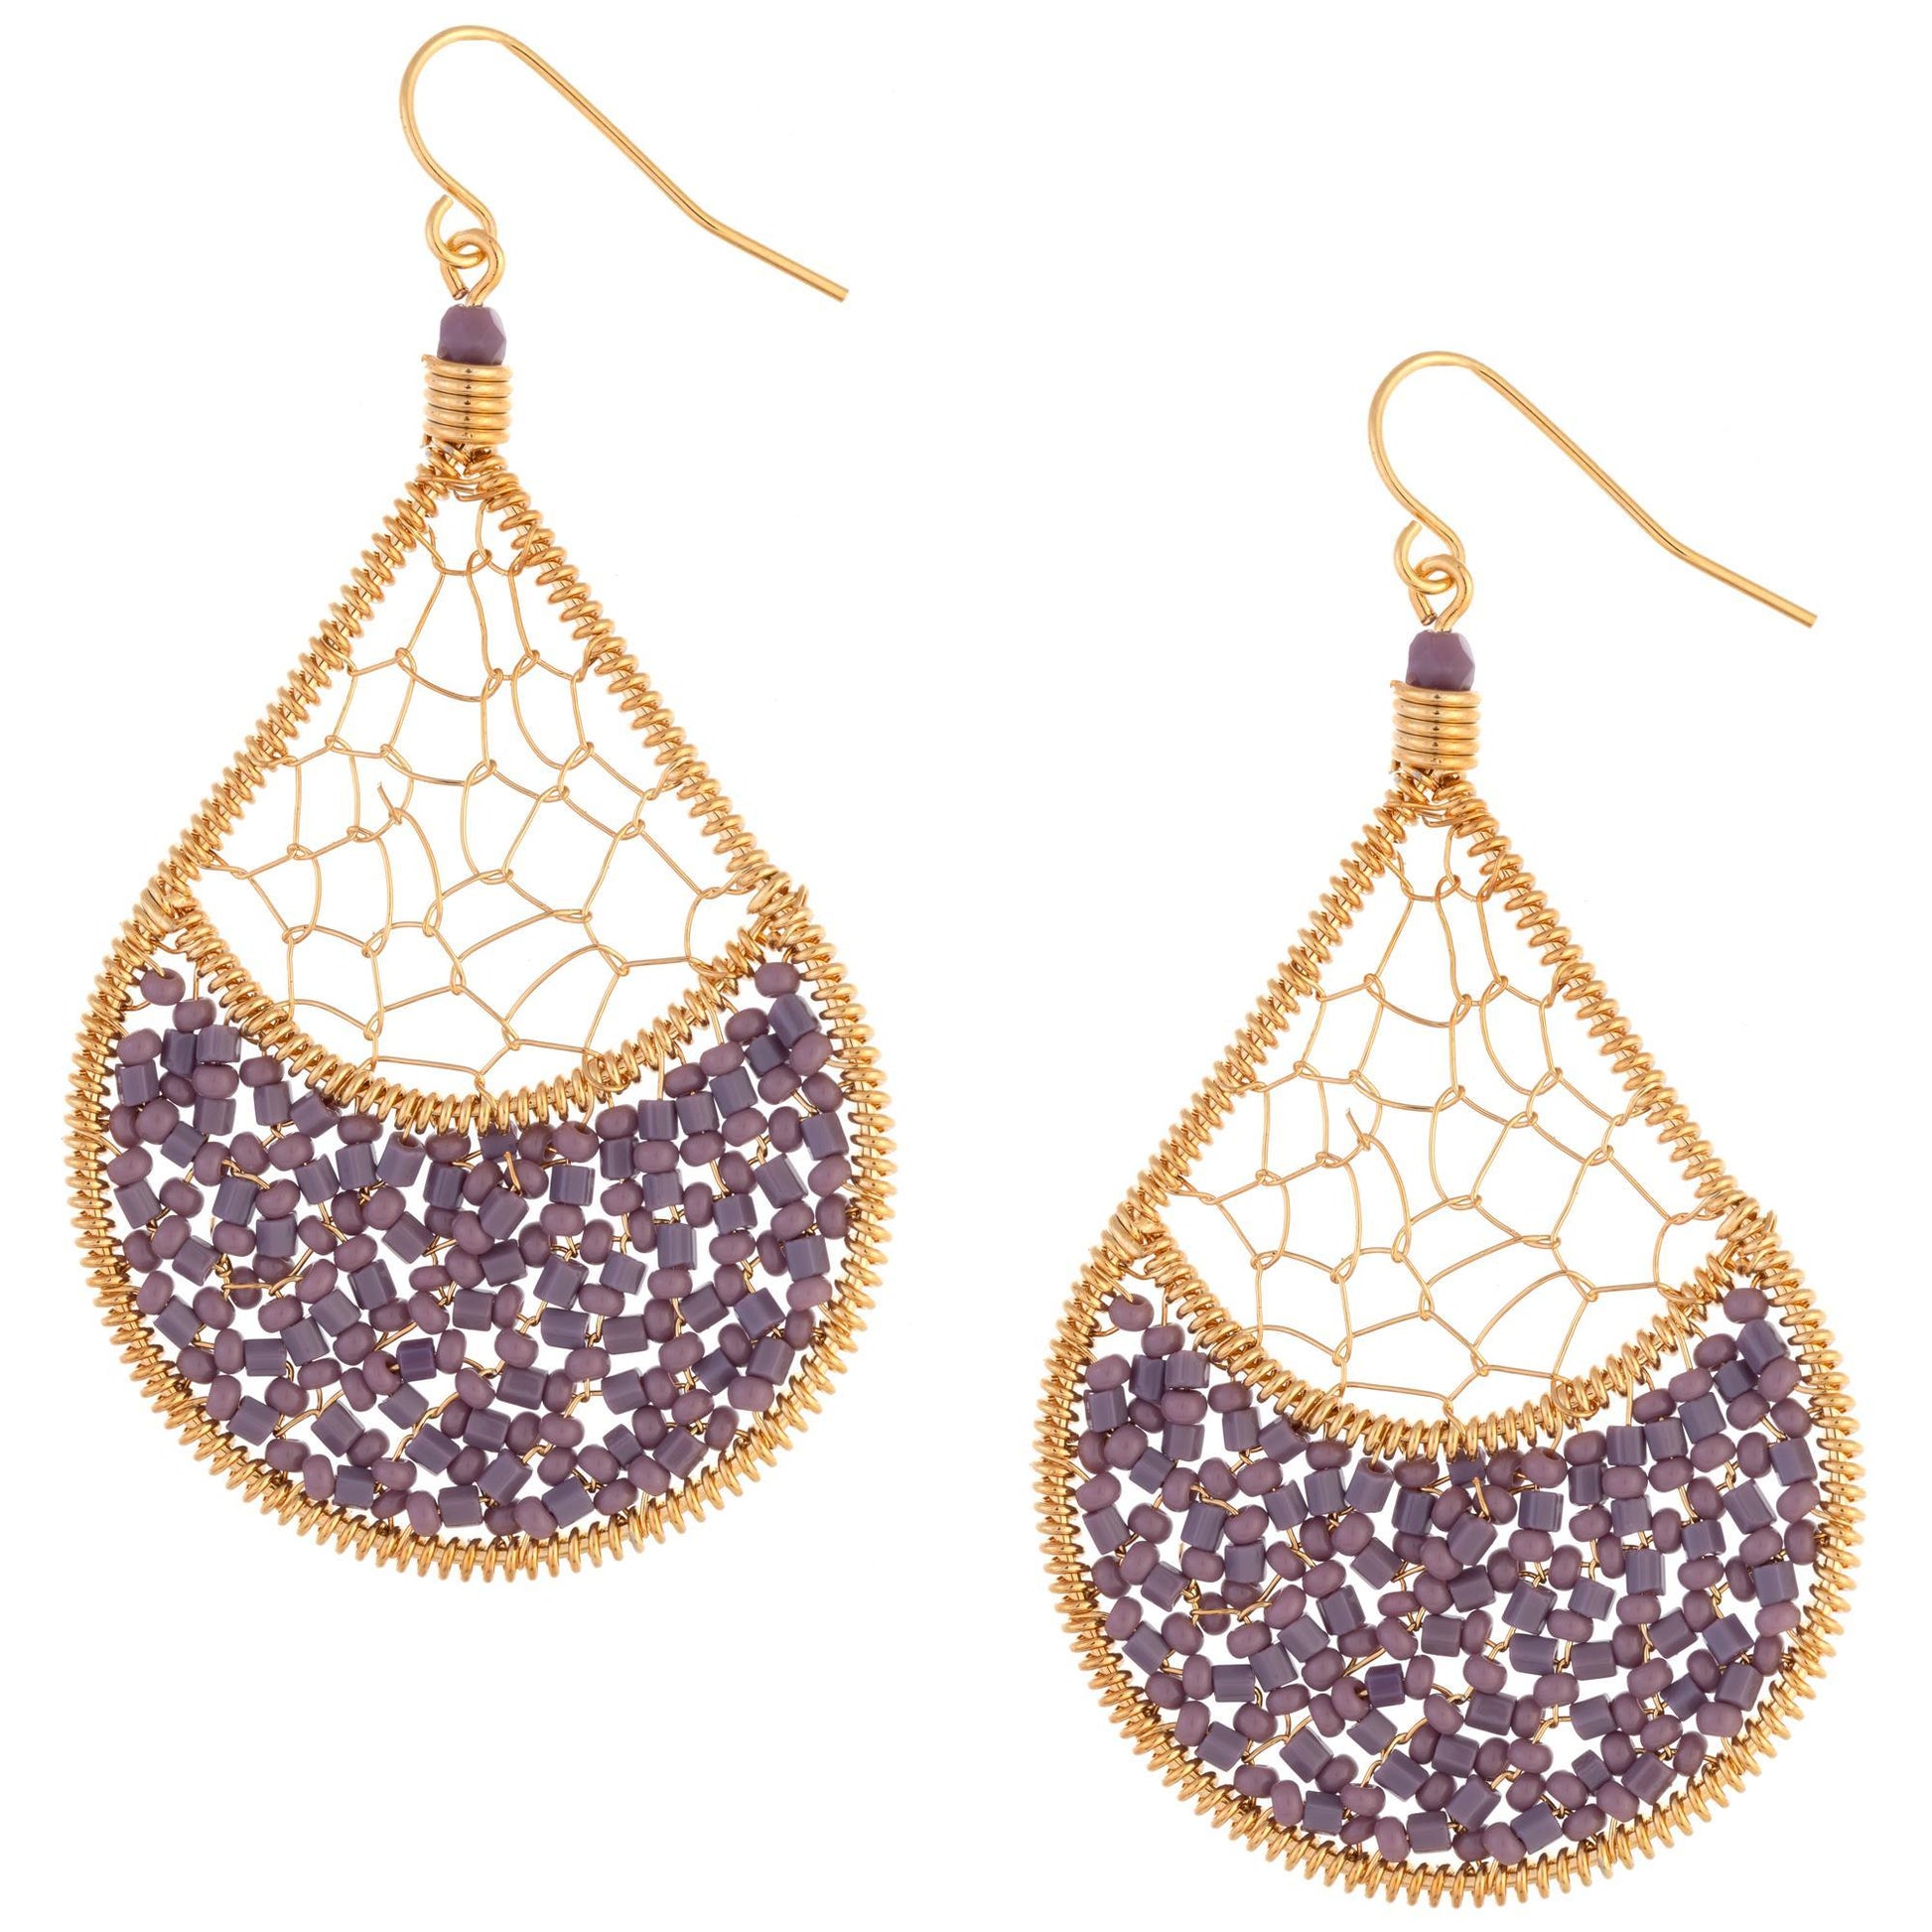 Threads & Beads Gold-Plated Earrings